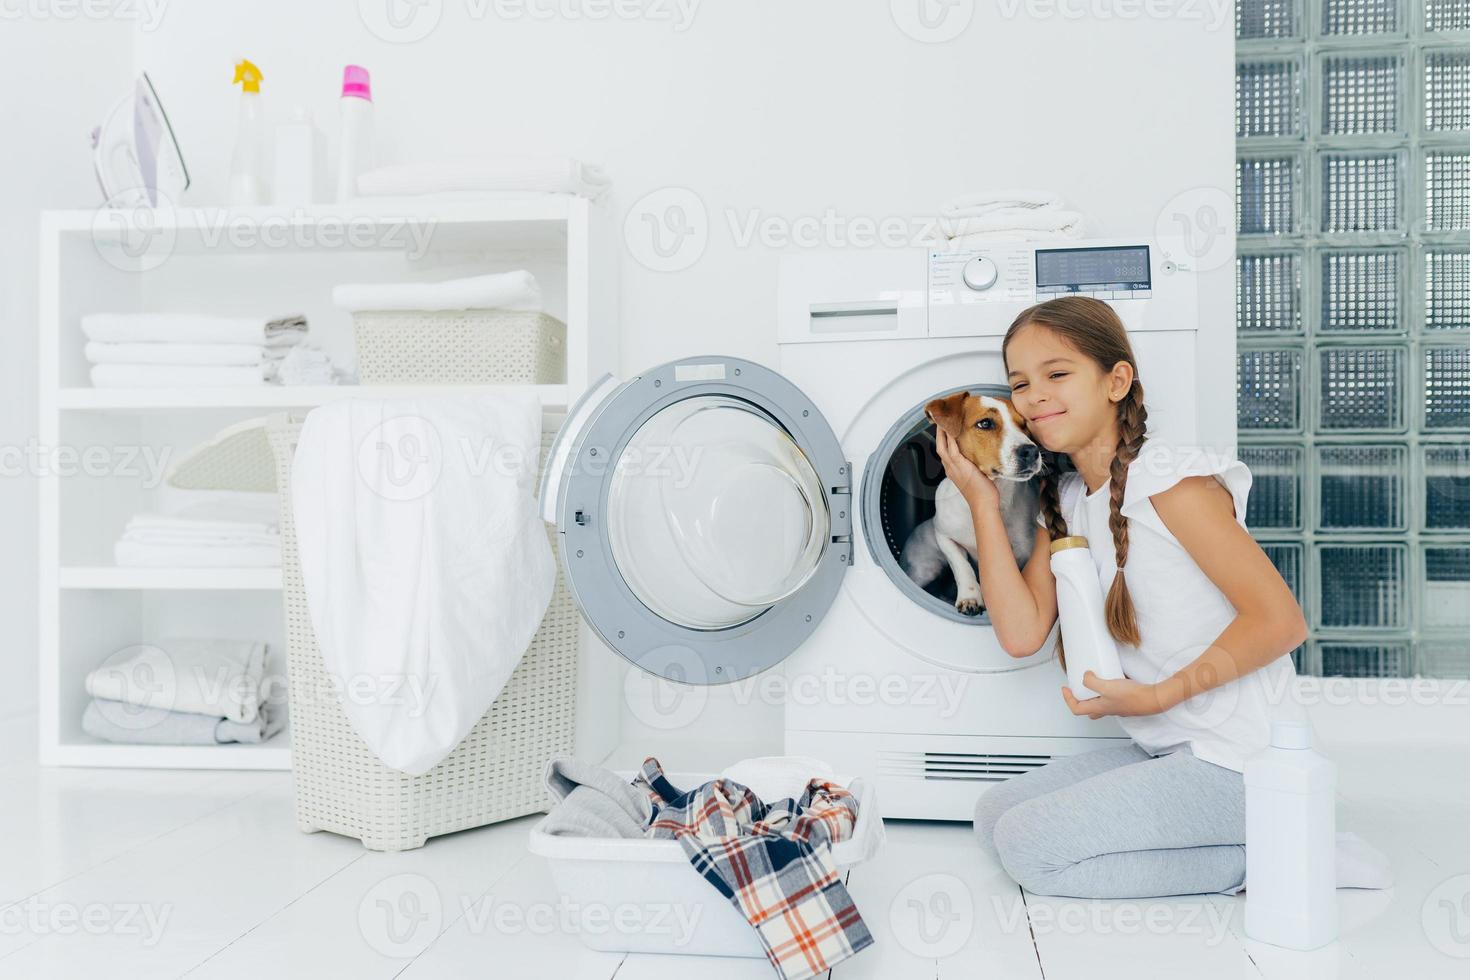 Photo of attractive girl petting pedigree dog in washing machine, holds washing detergent, going to load washer, busy with laundry and domestic chores, washes clothes at home, poses indoors.